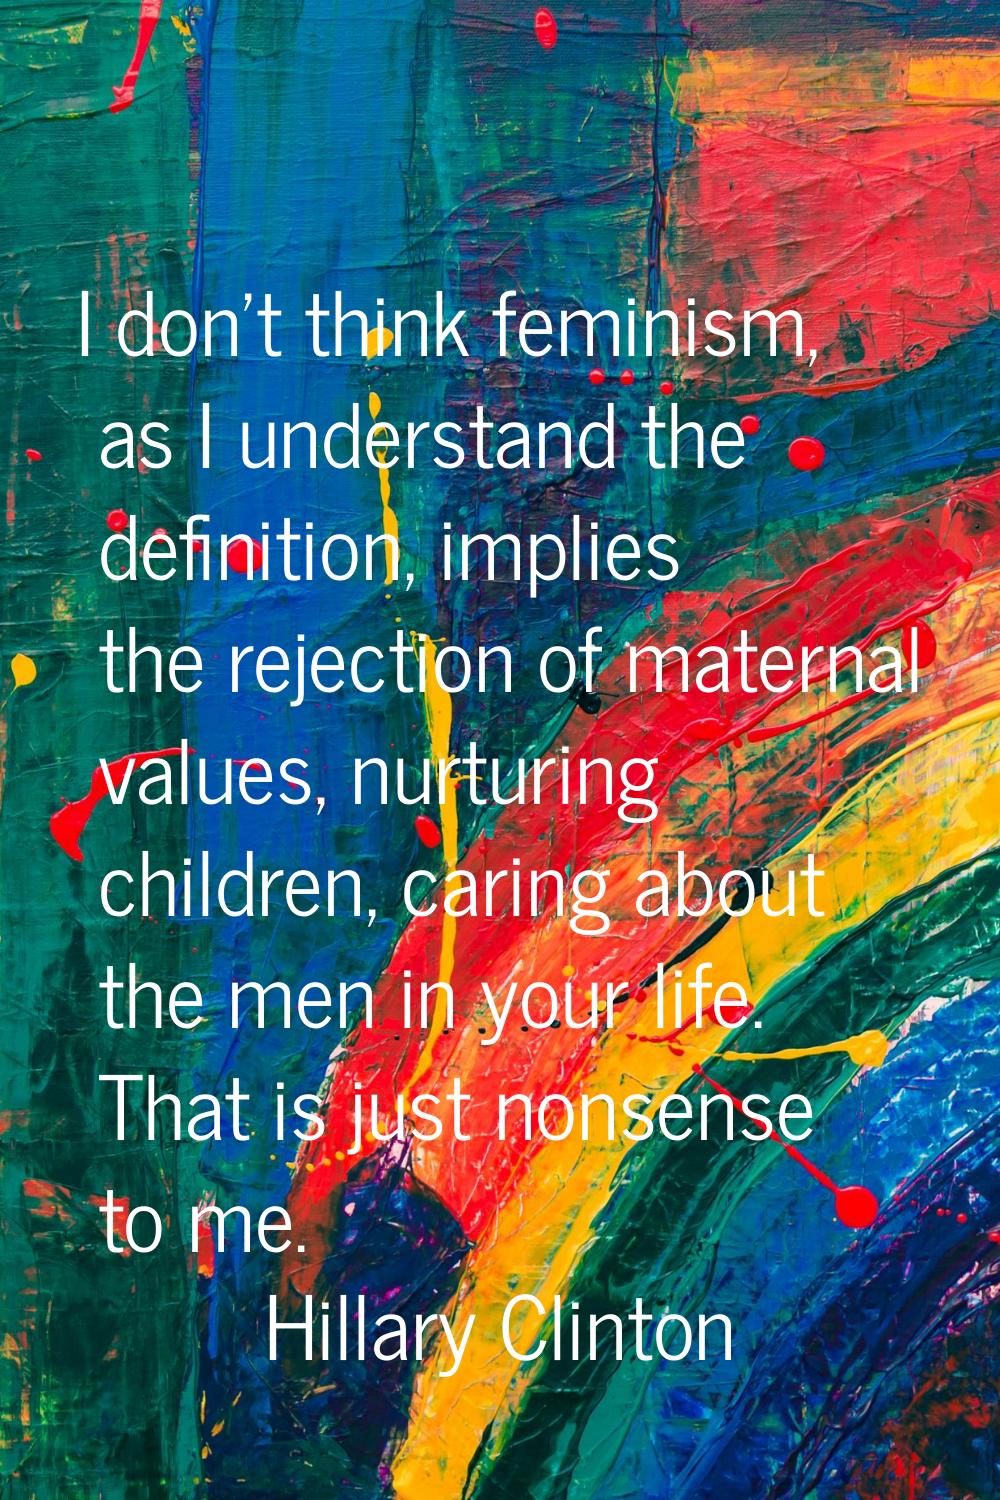 I don't think feminism, as I understand the definition, implies the rejection of maternal values, n